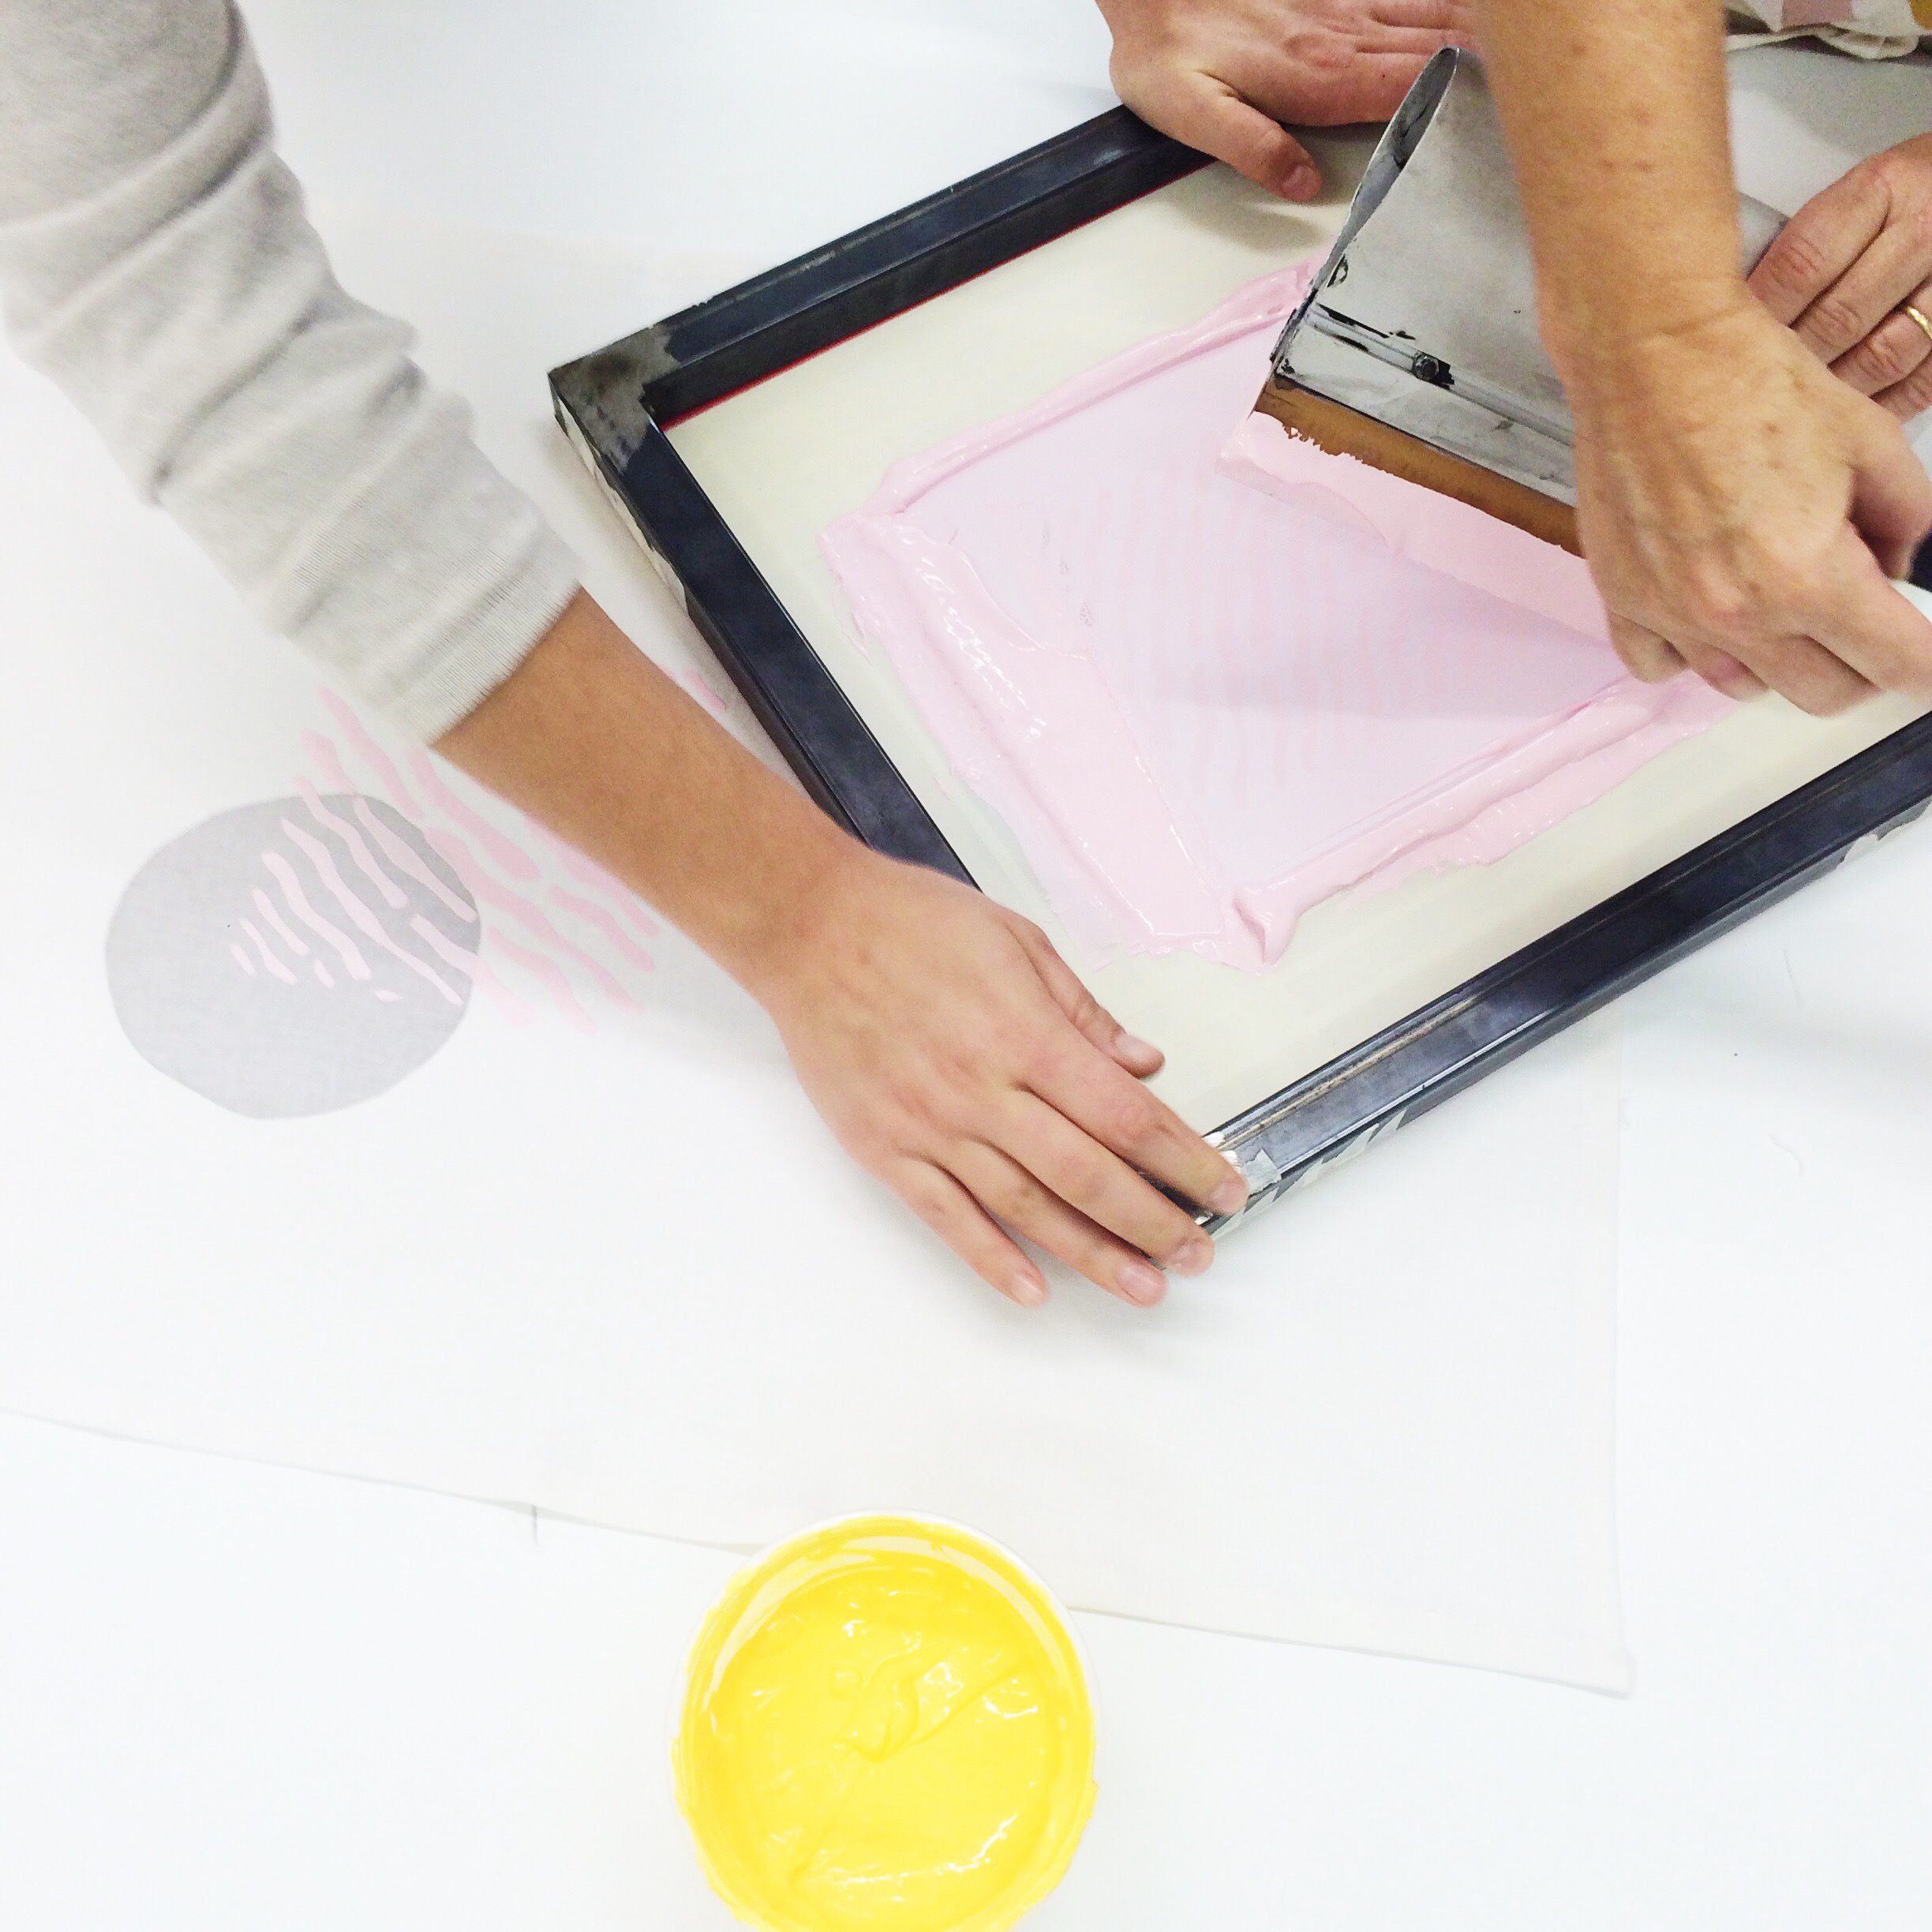 Learn more about screen printing and how it can help your graphics,